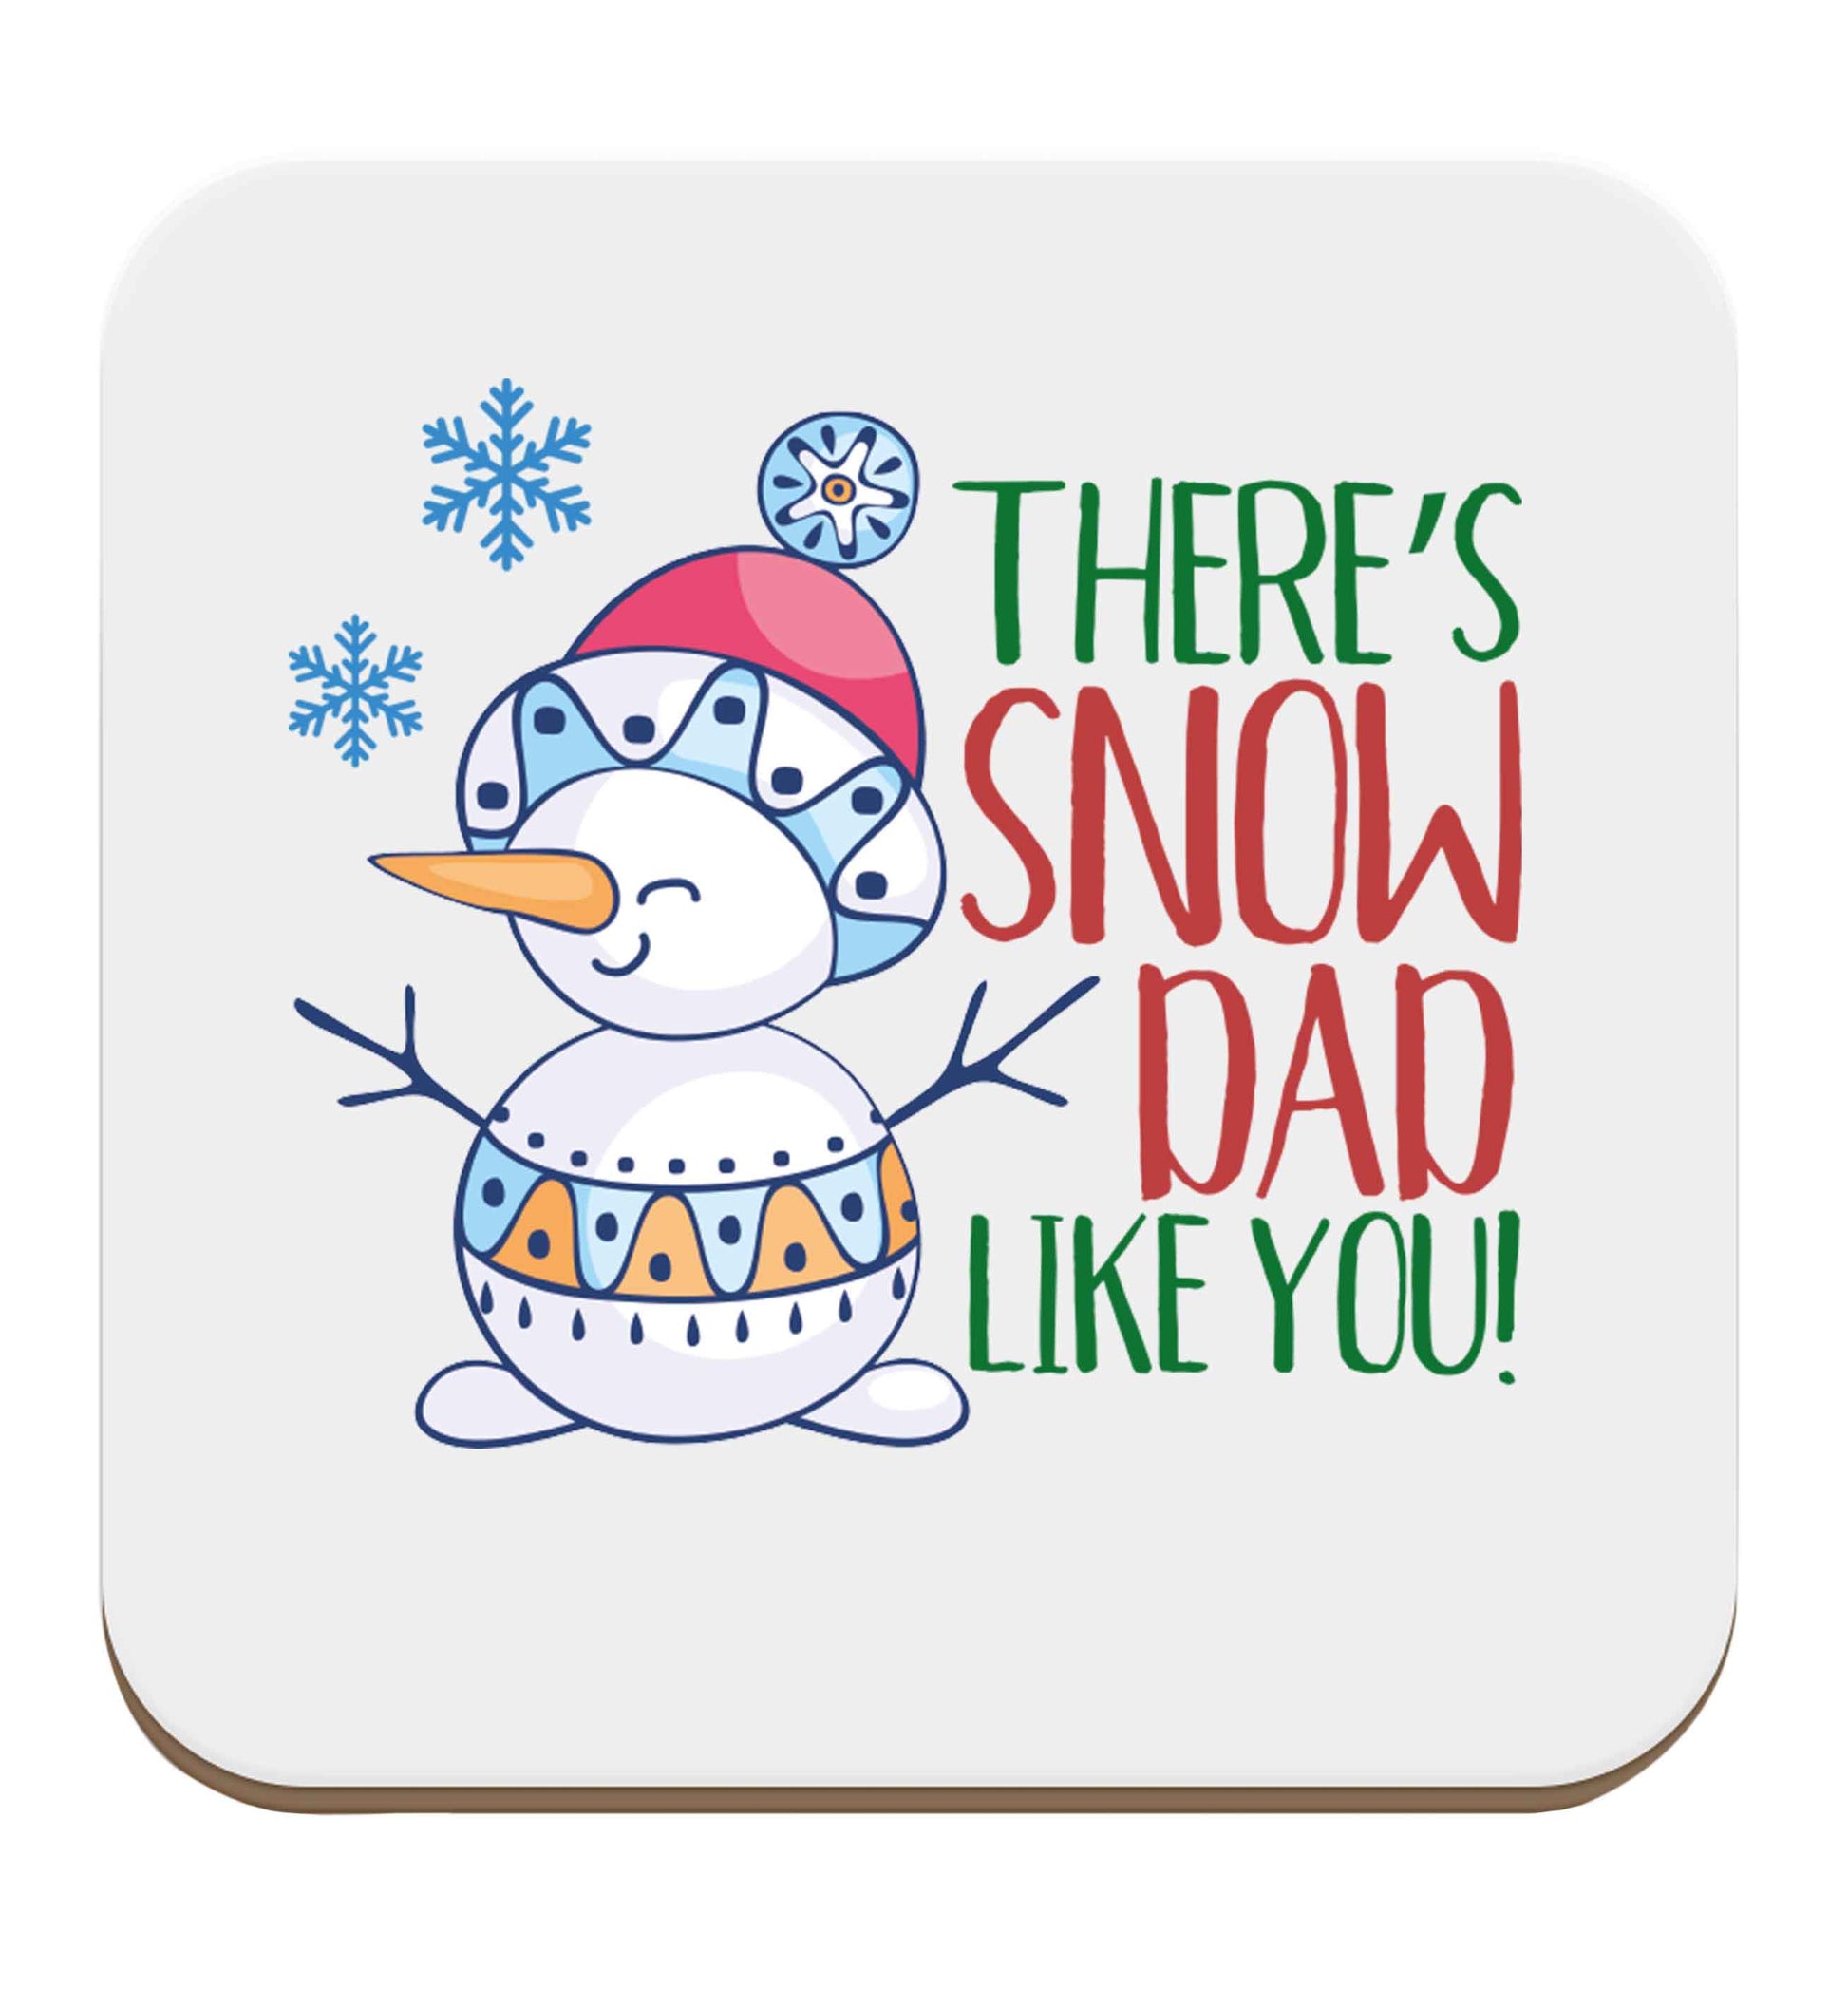 There's snow dad like you set of four coasters